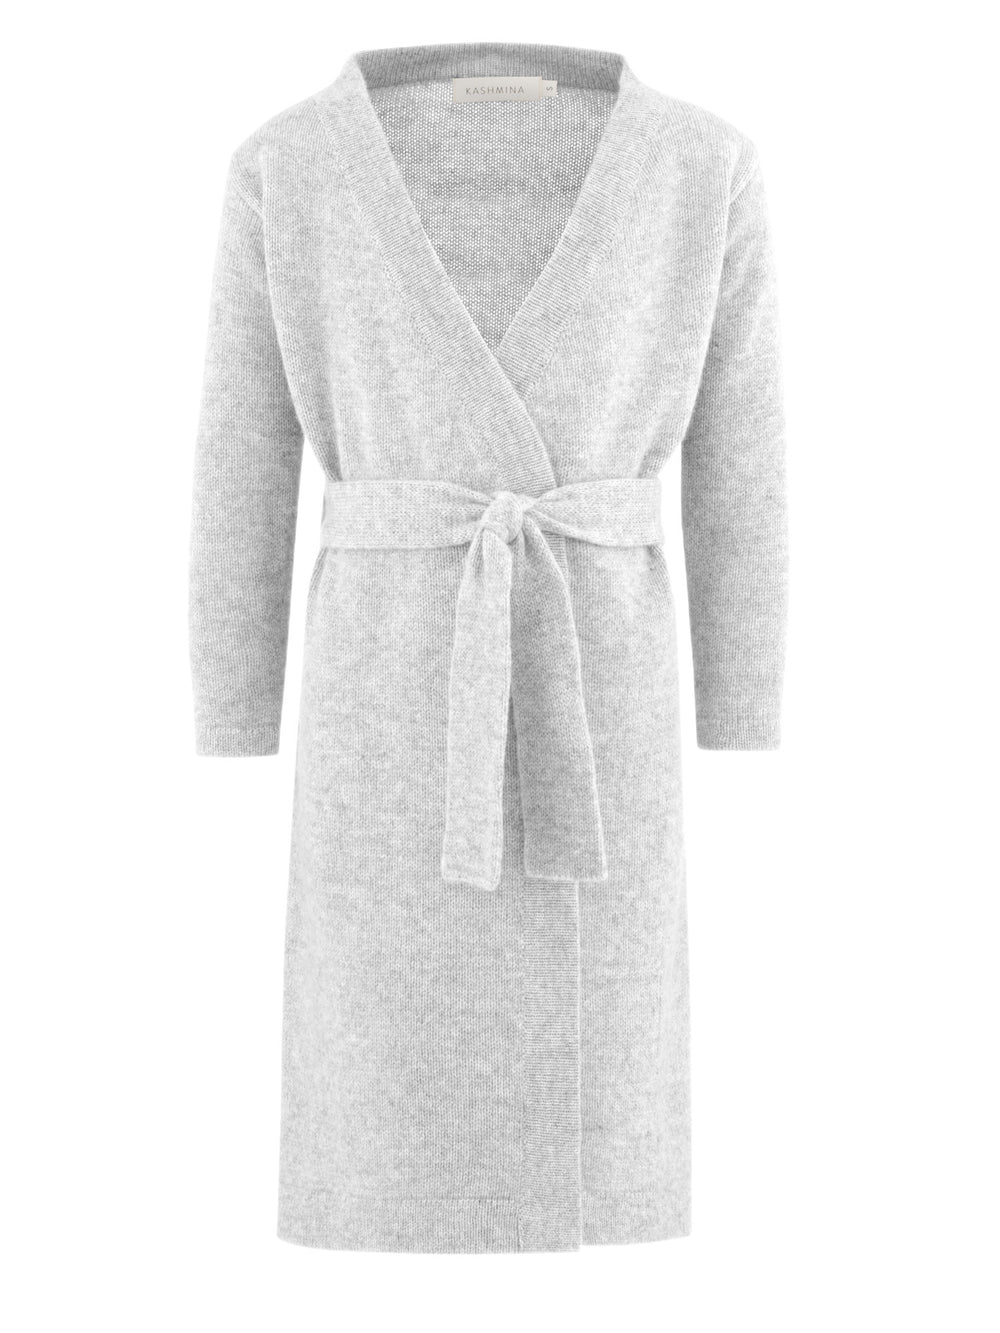 Cashmere robe for kids, 100% pure cashmere, soft, warm, non itching, Kashmina